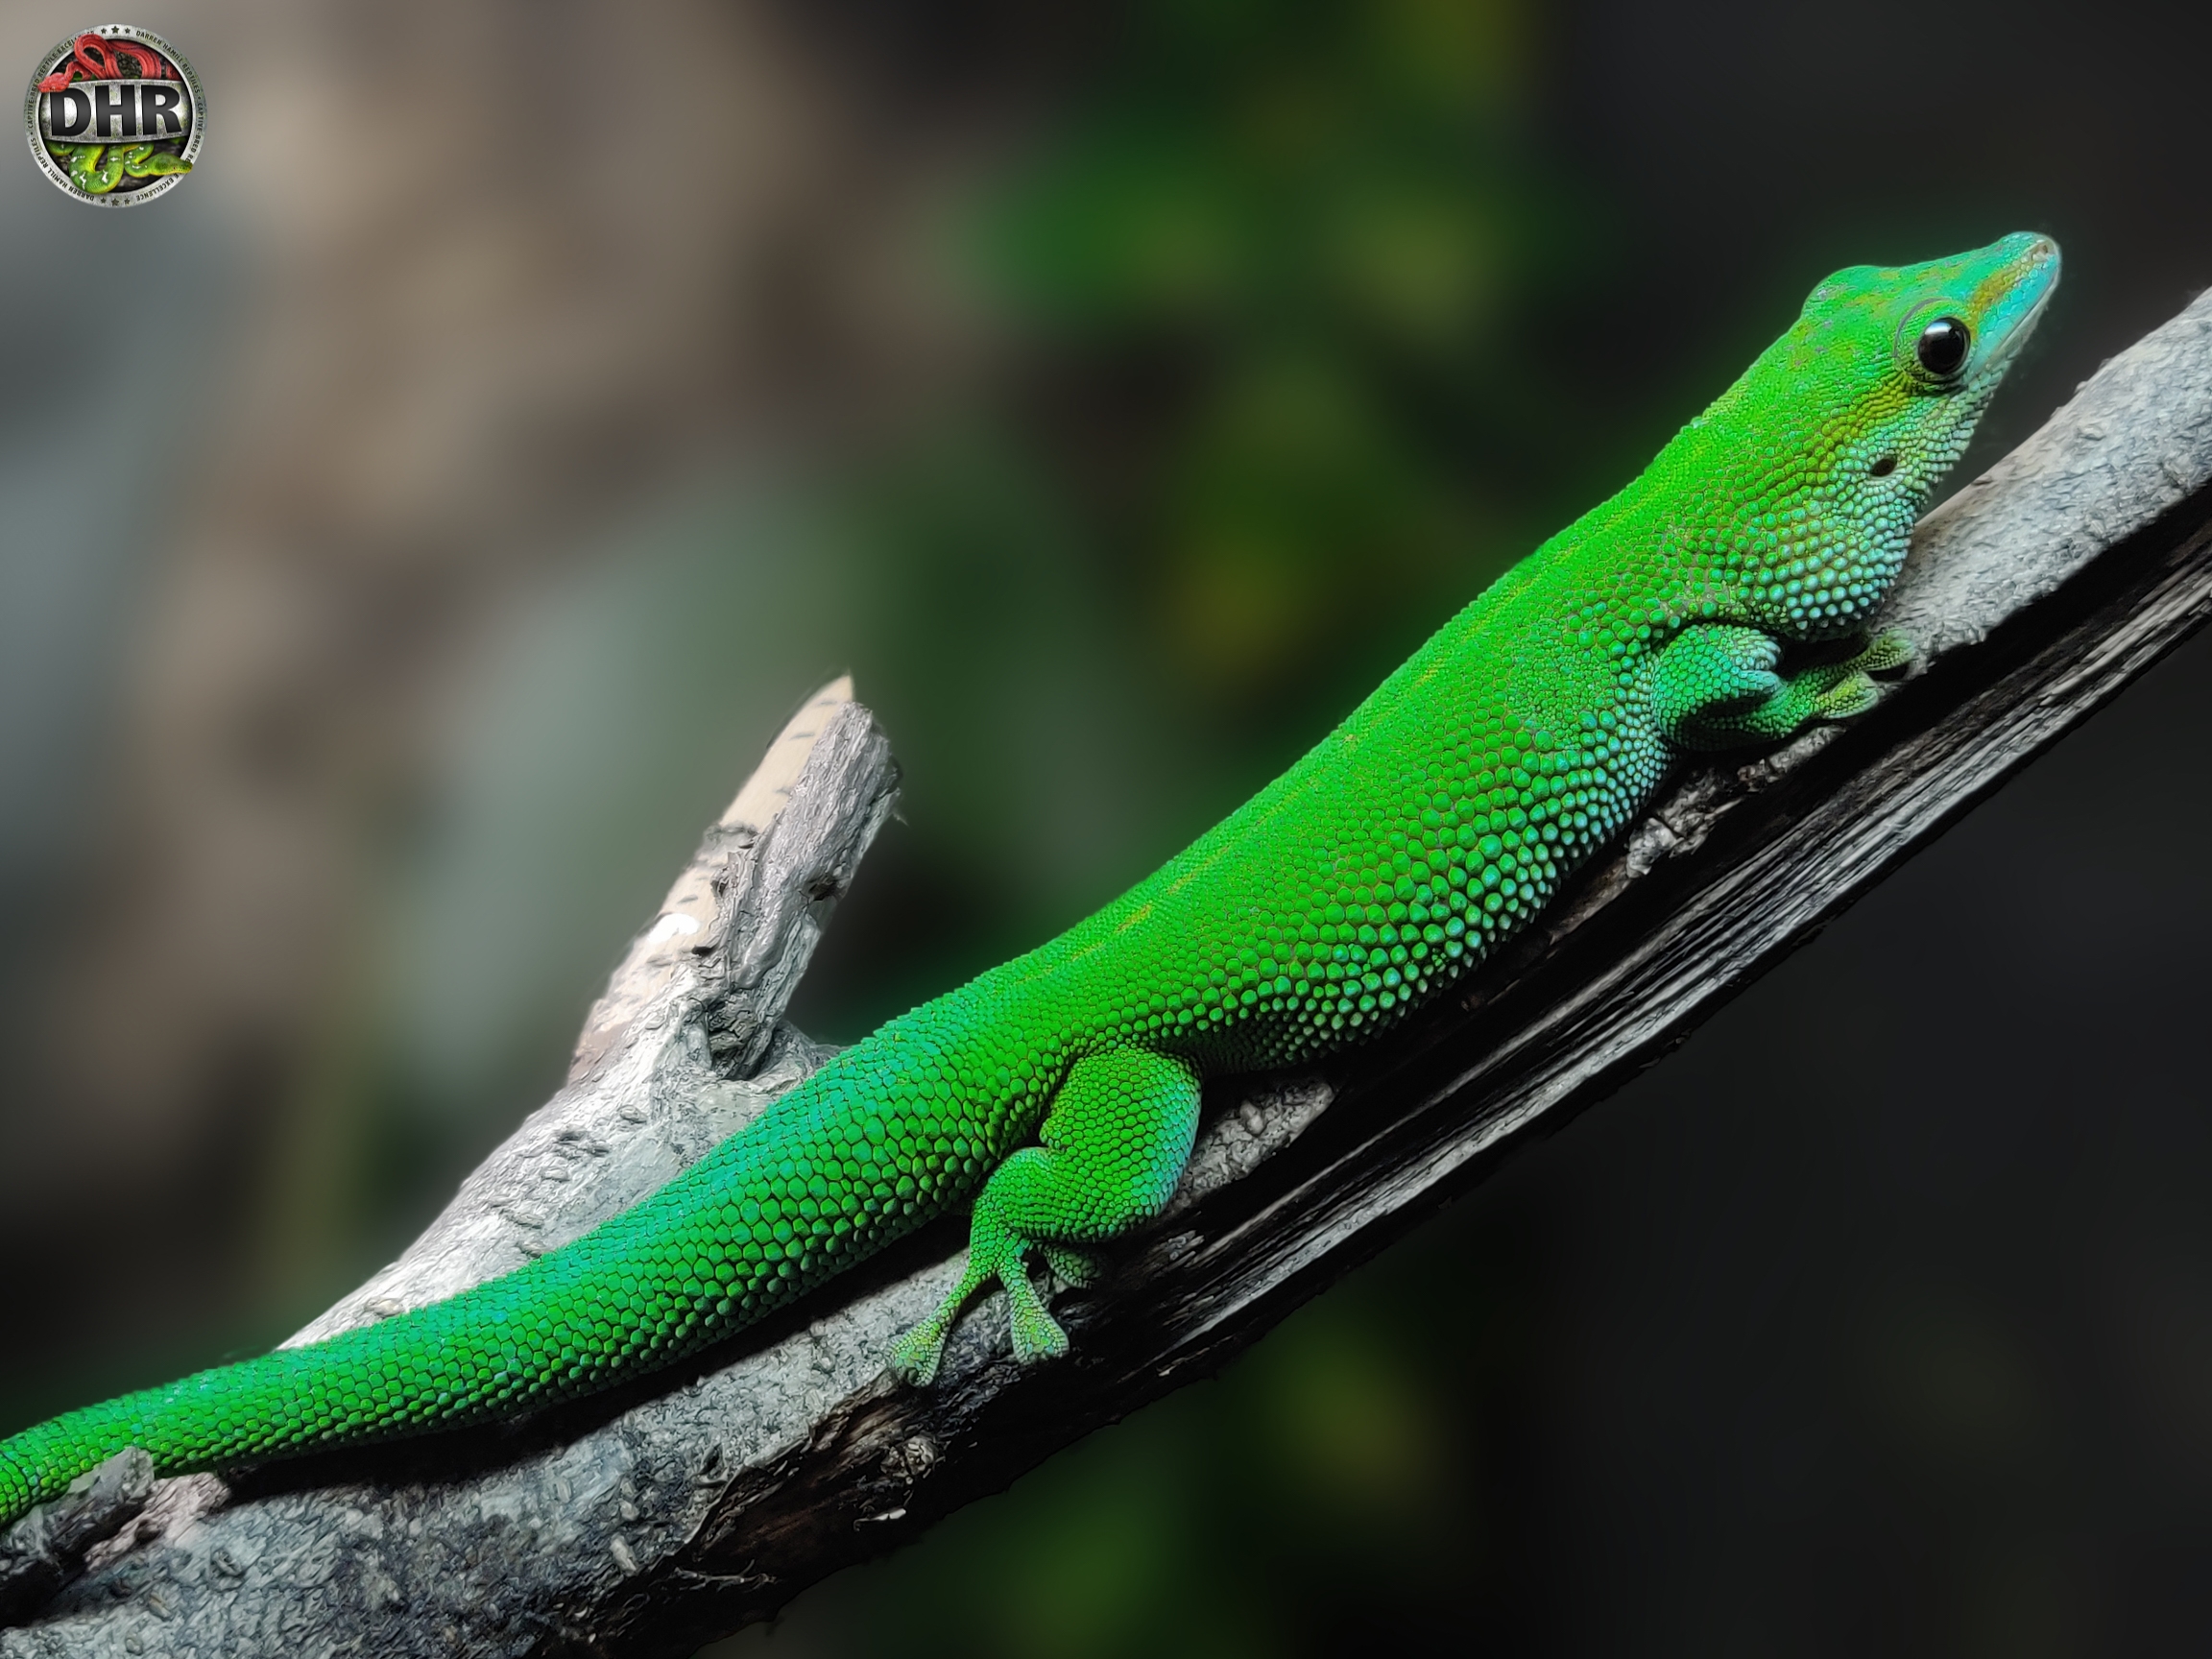 Quick pic: Boehme’s Day Gecko